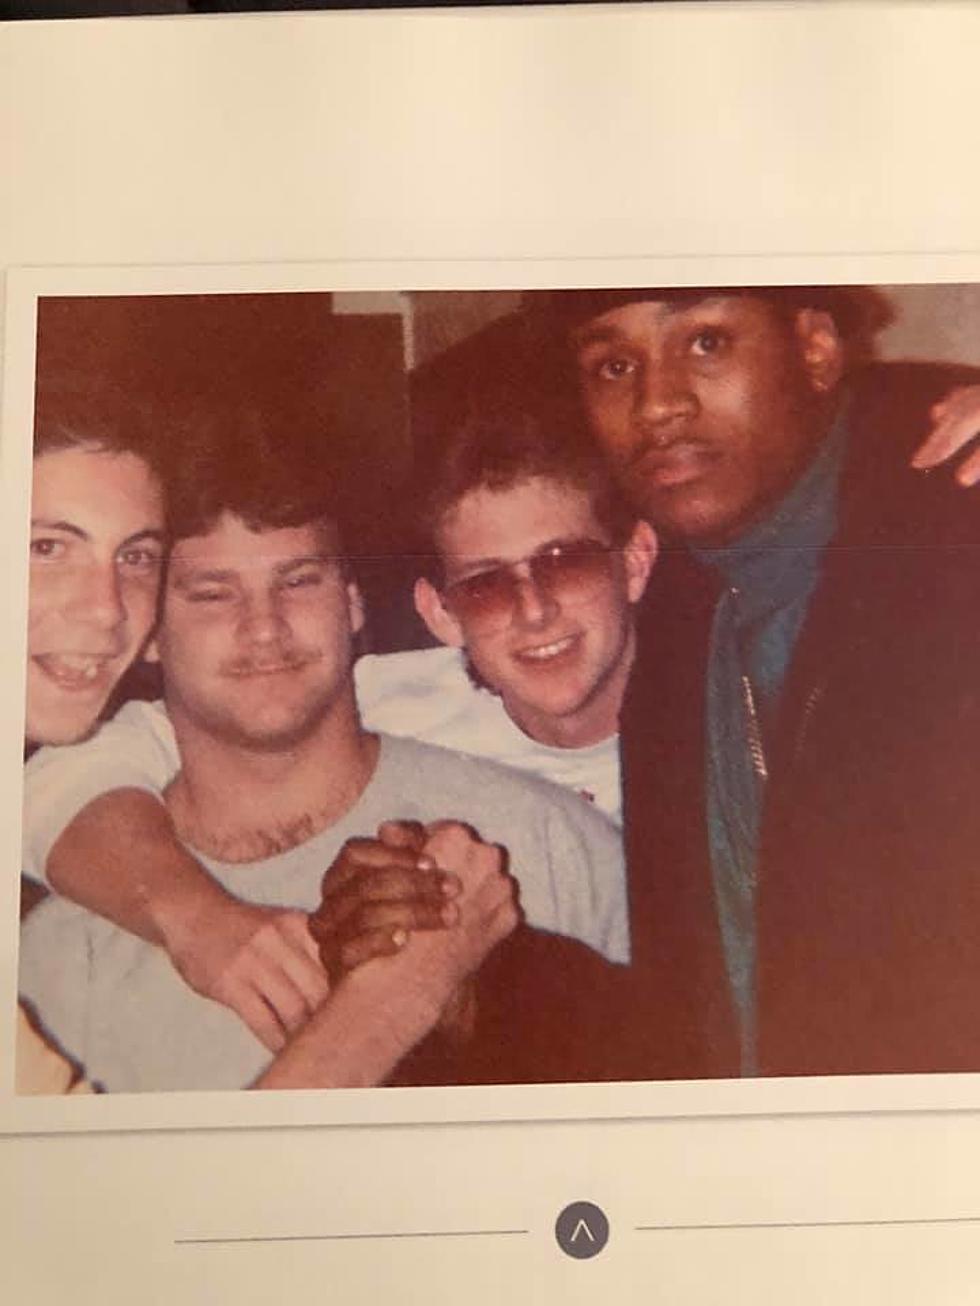 LL Cool J Used to Hang at This Hudson Valley College